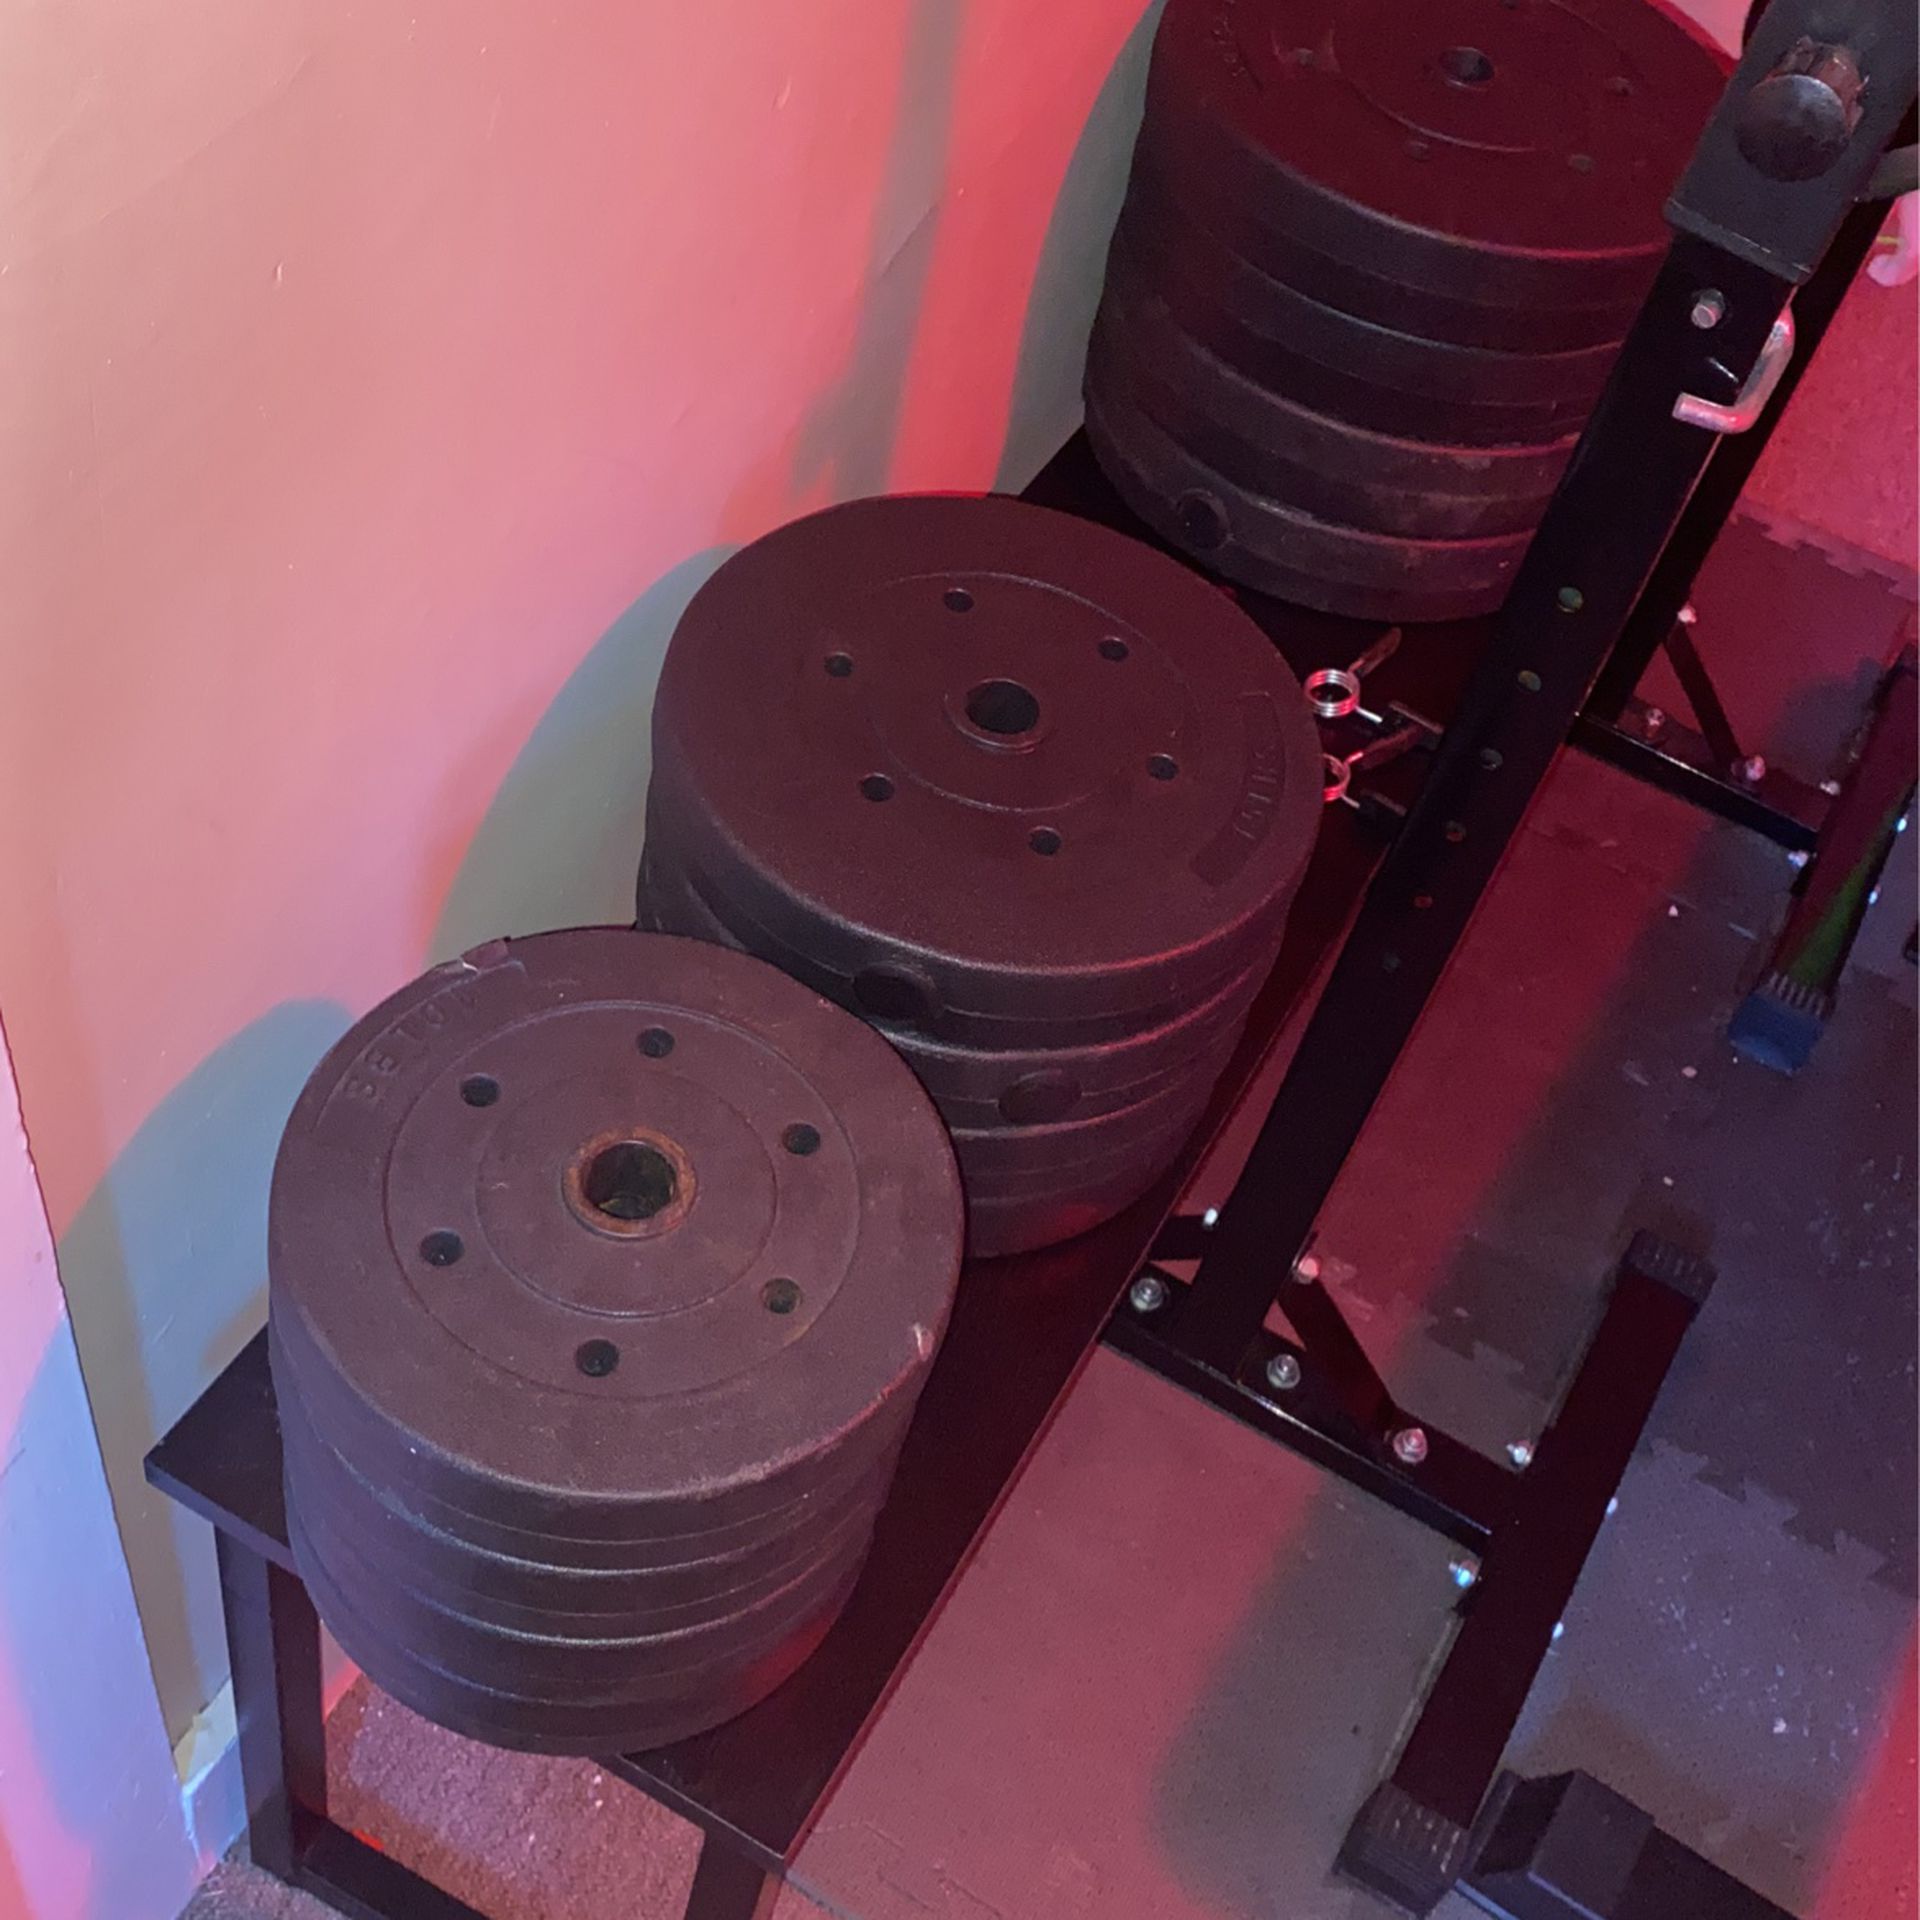 200LB vinyl Weight Set. (Collars And Barbells Included!!)